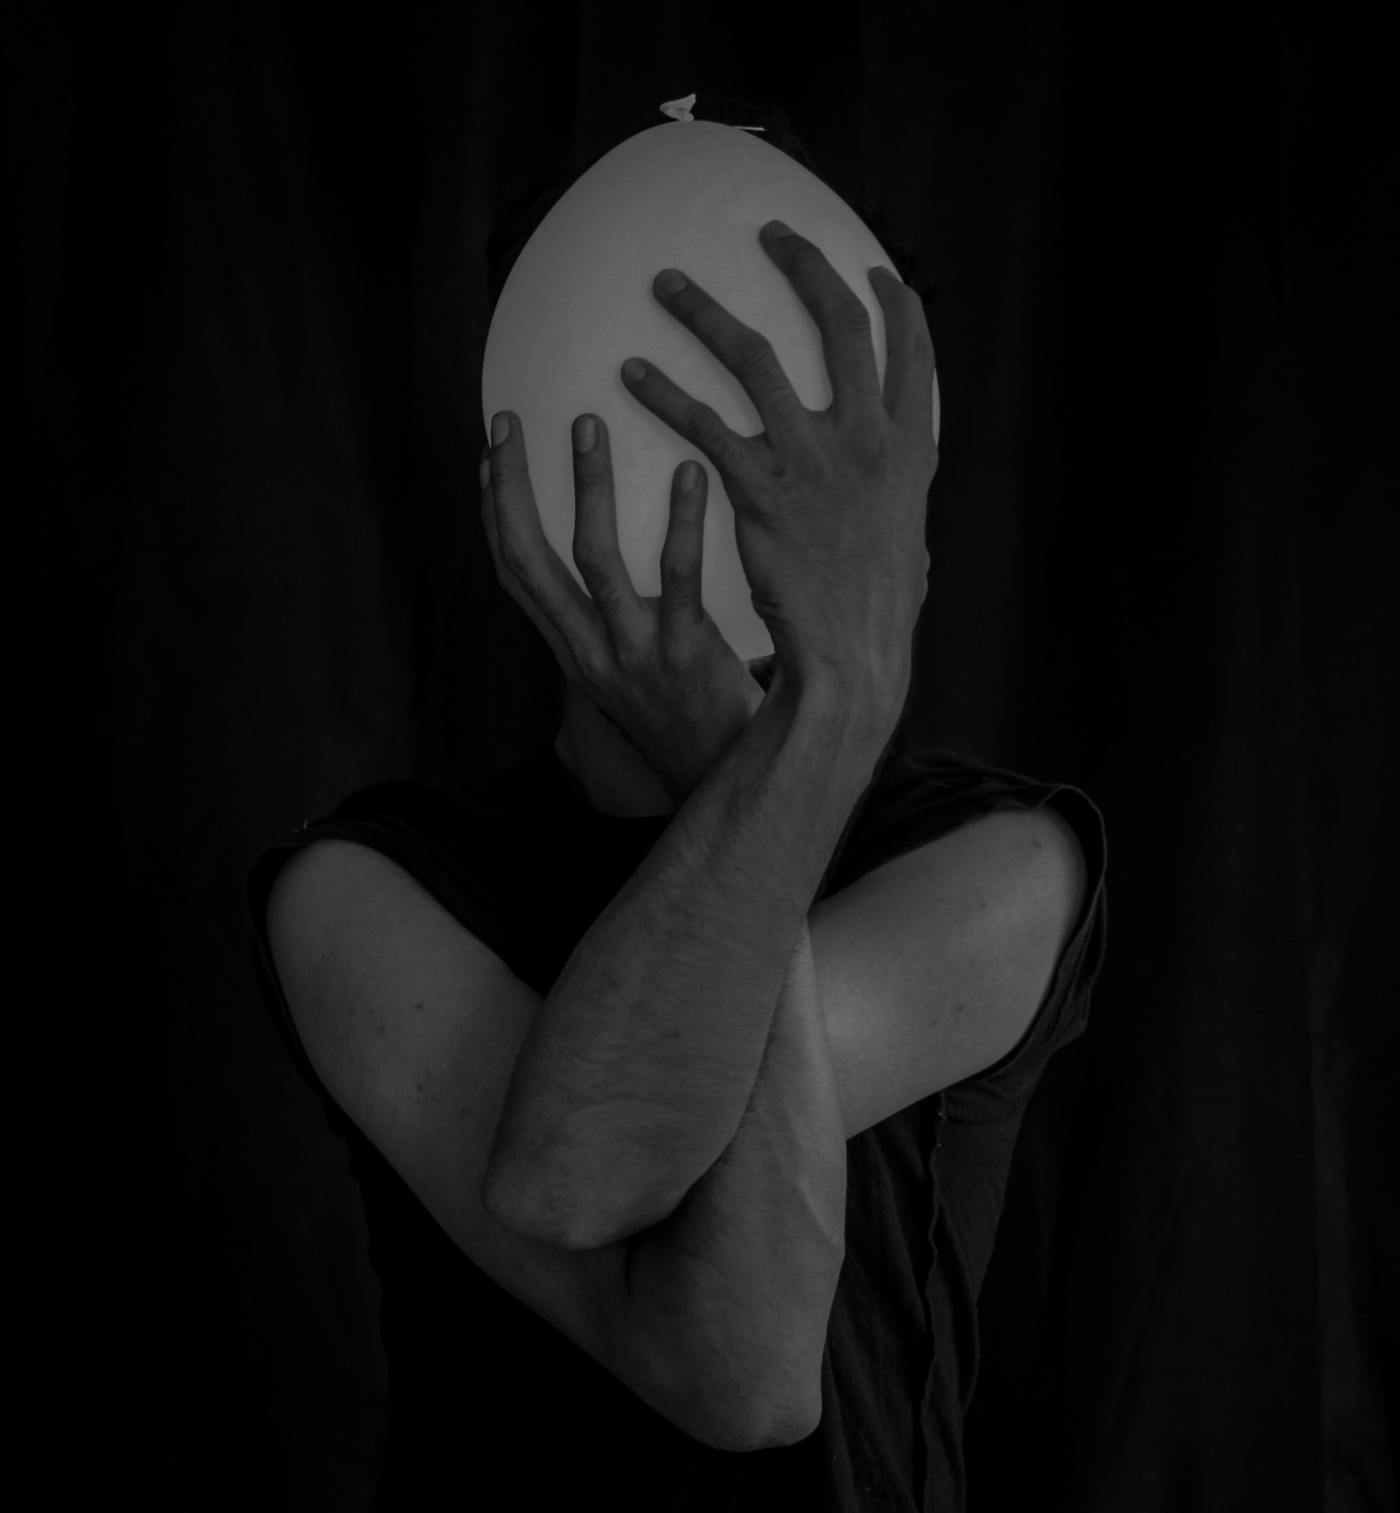 black and white photo of a man holding a ballon over his face